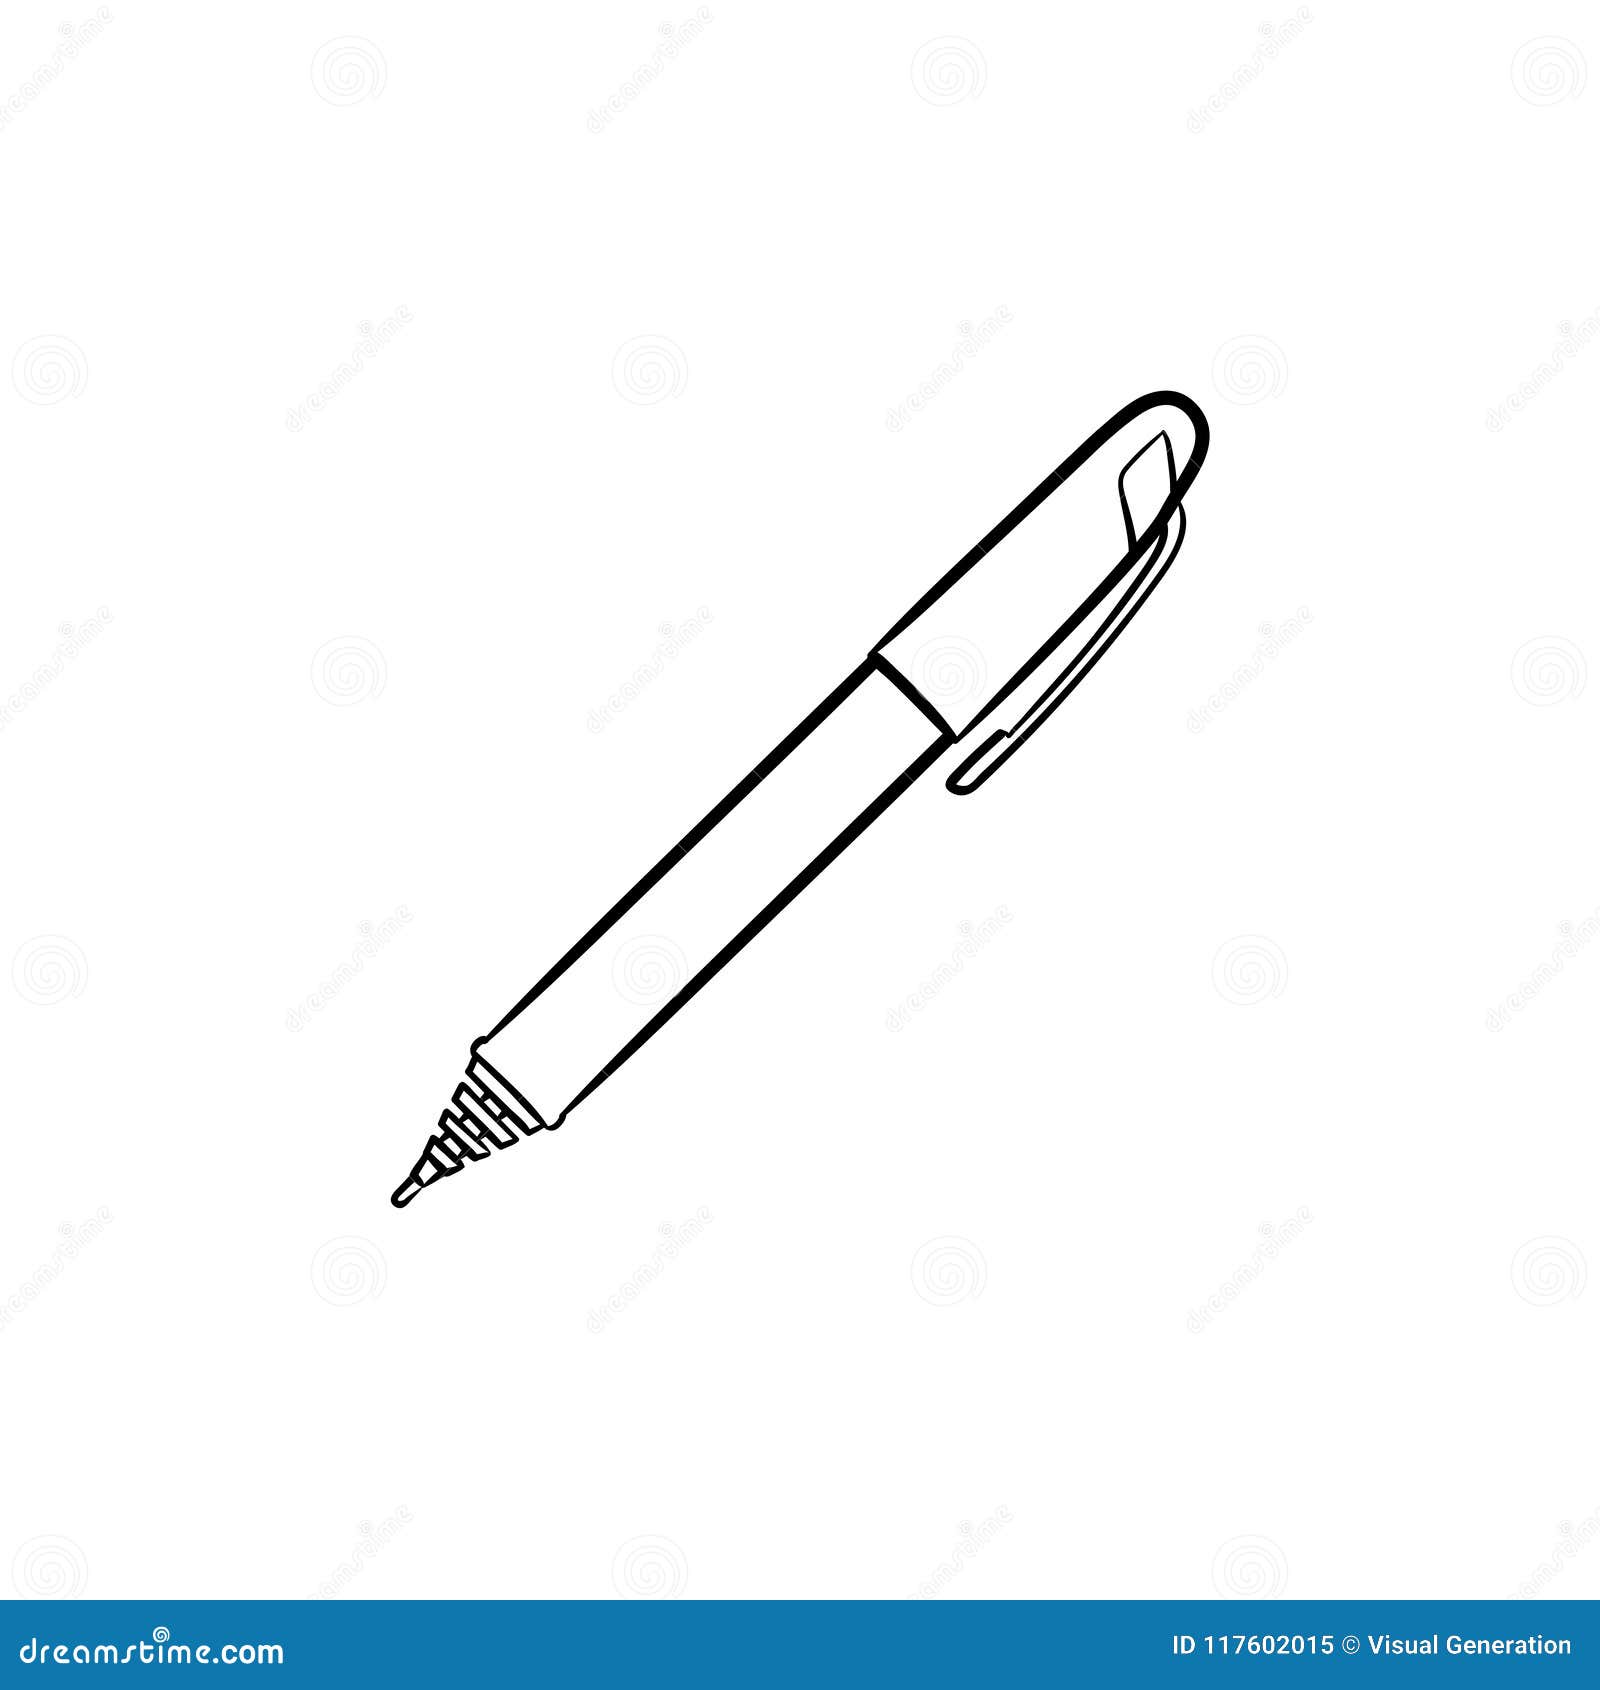 Handwriting Pen Hand Drawn Outline Doodle Icon. Stock Vector - Illustration  of outline, logo: 117602015